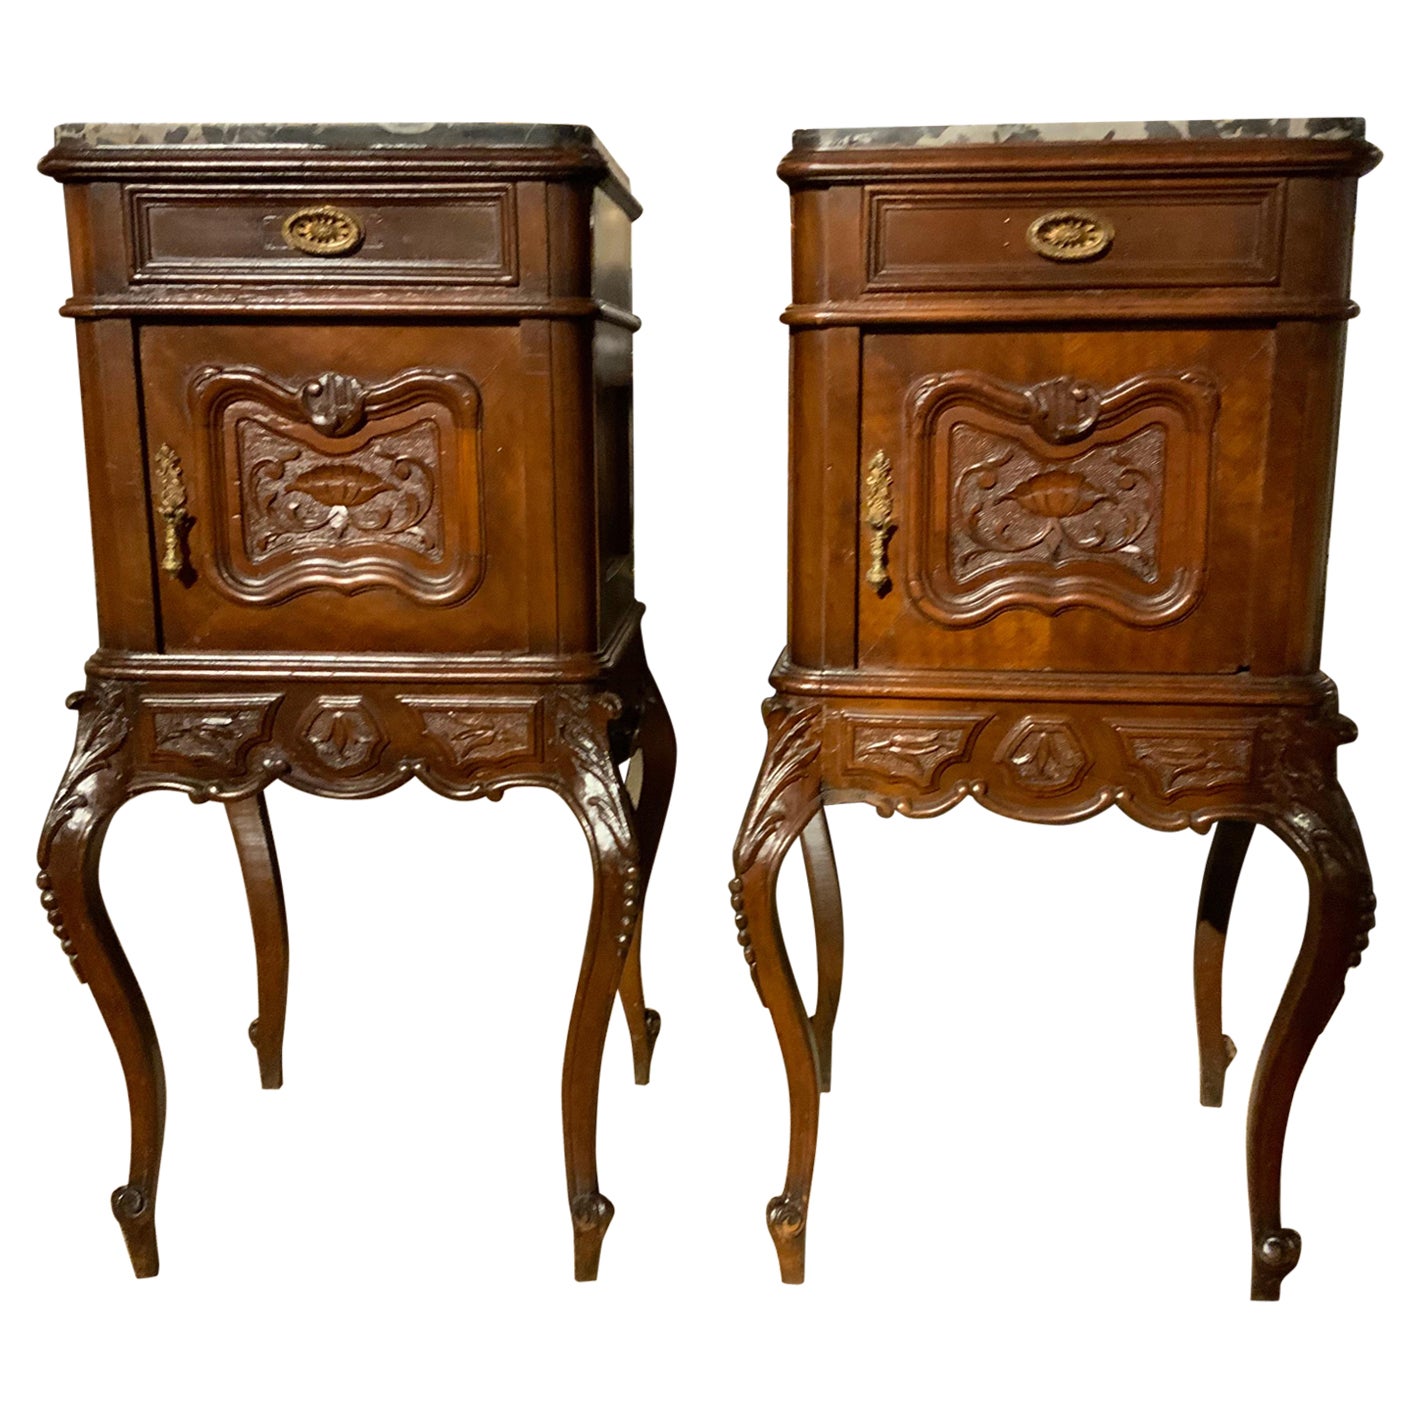 Pair of Louis XV-Style bedside cabinets